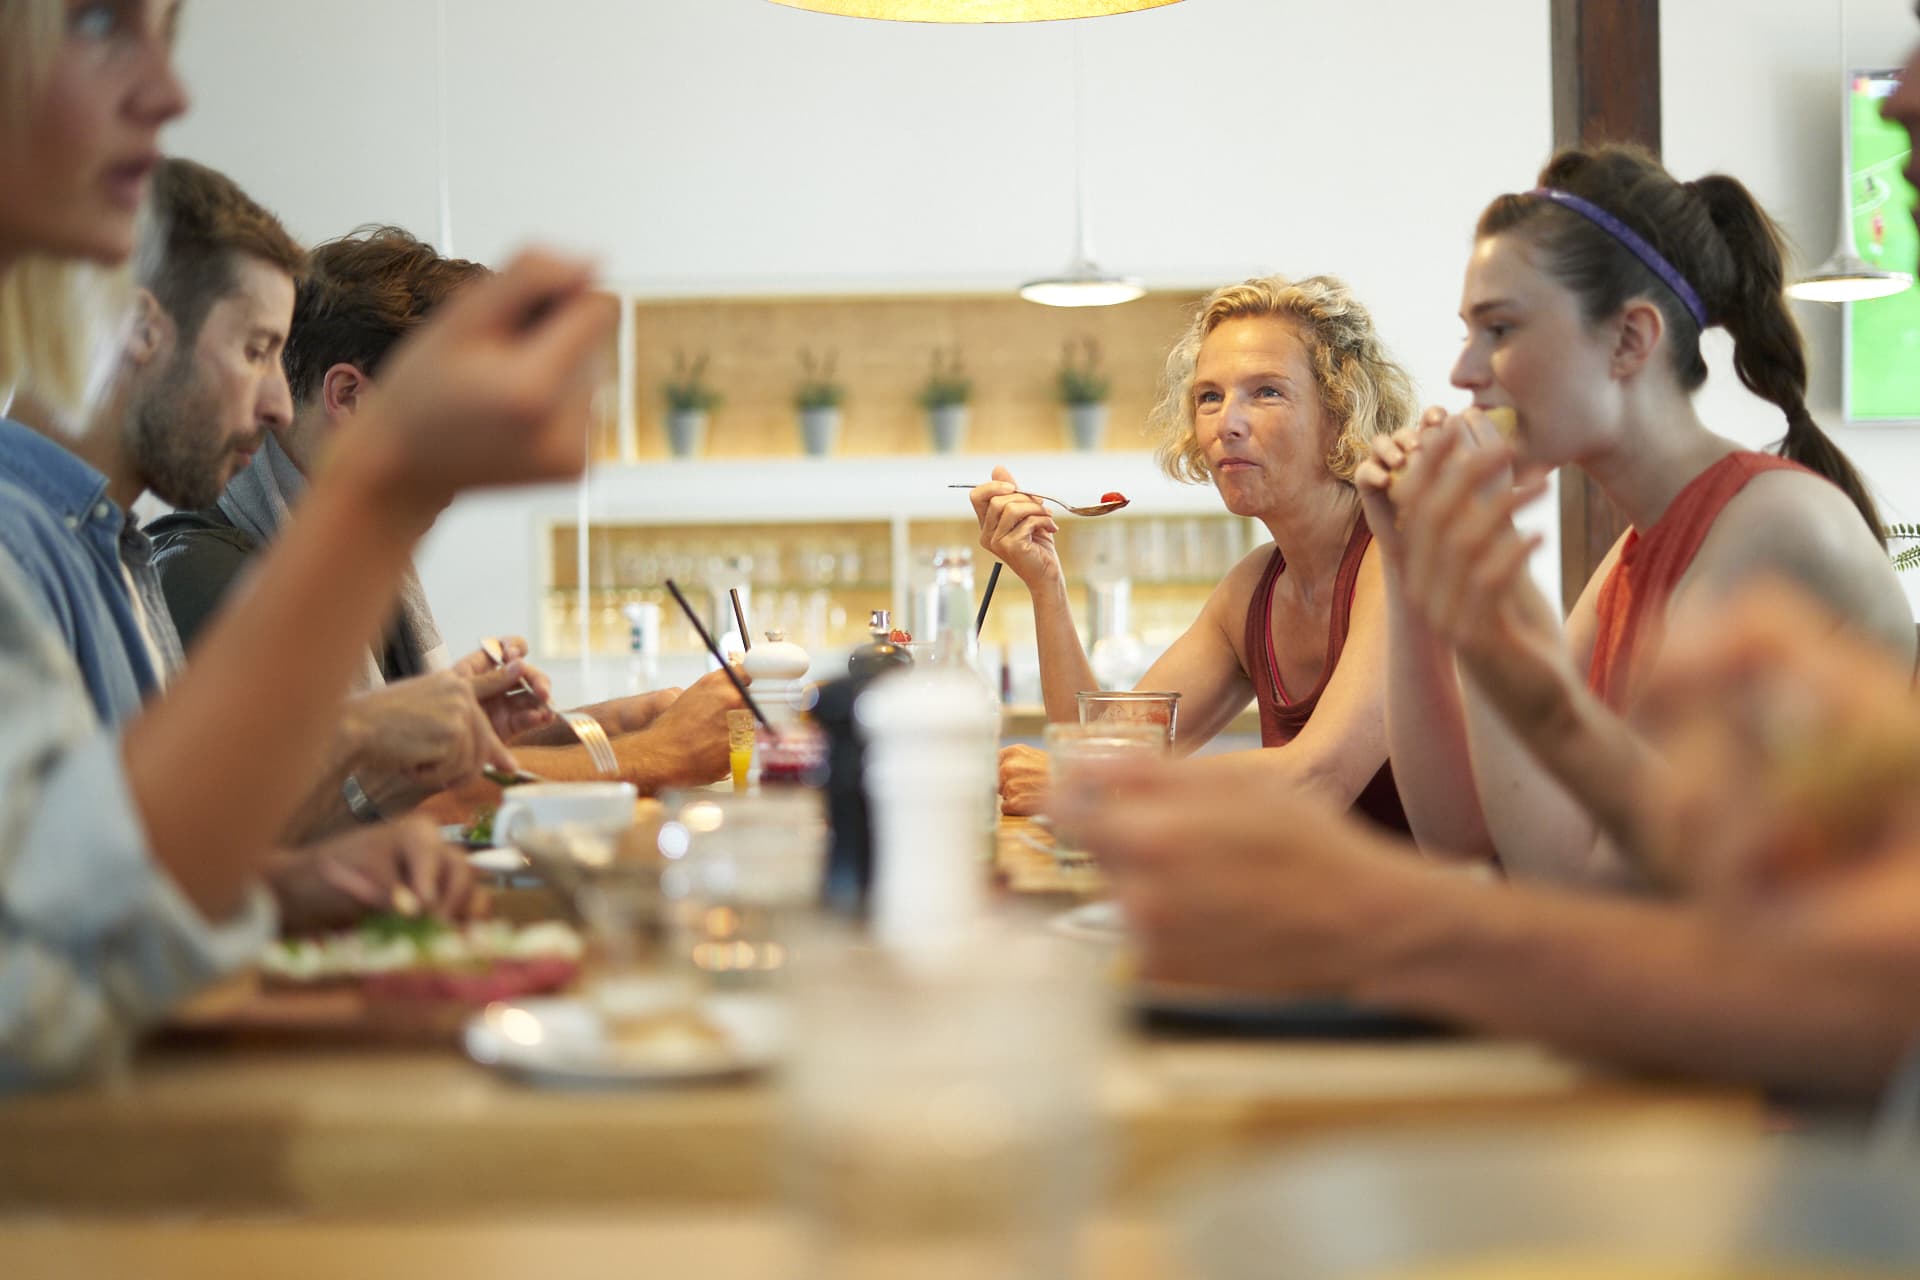 A group of members eating together at a gym restaurant